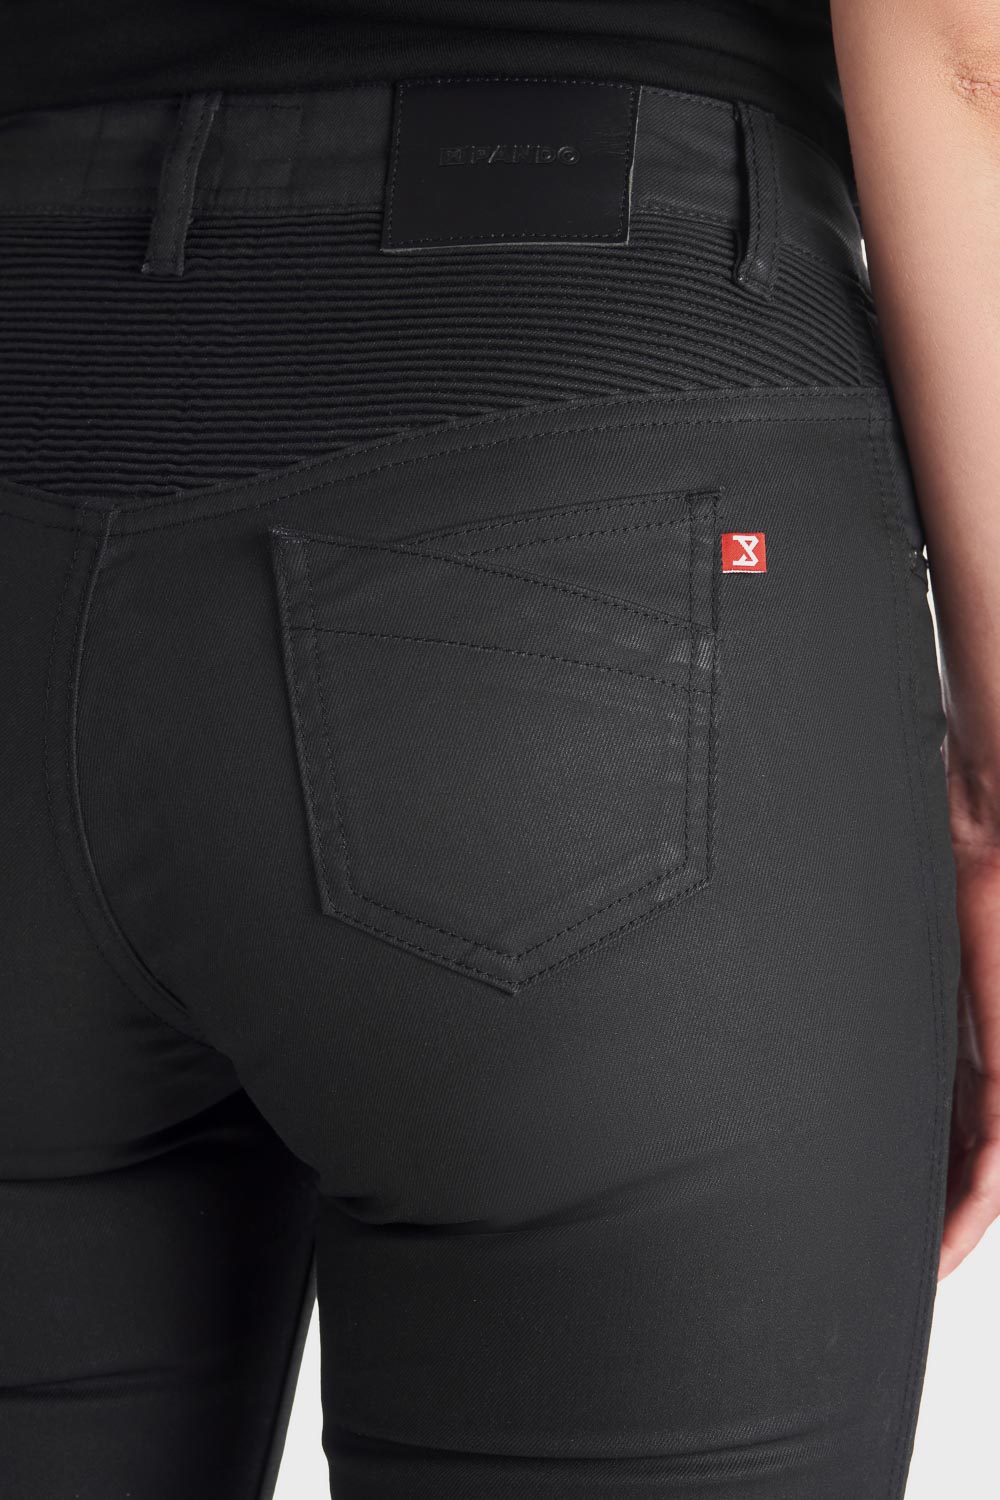 a pocket of woman&#39;s legs wearing slim-fit motorcycle jeans from Pando Moto 